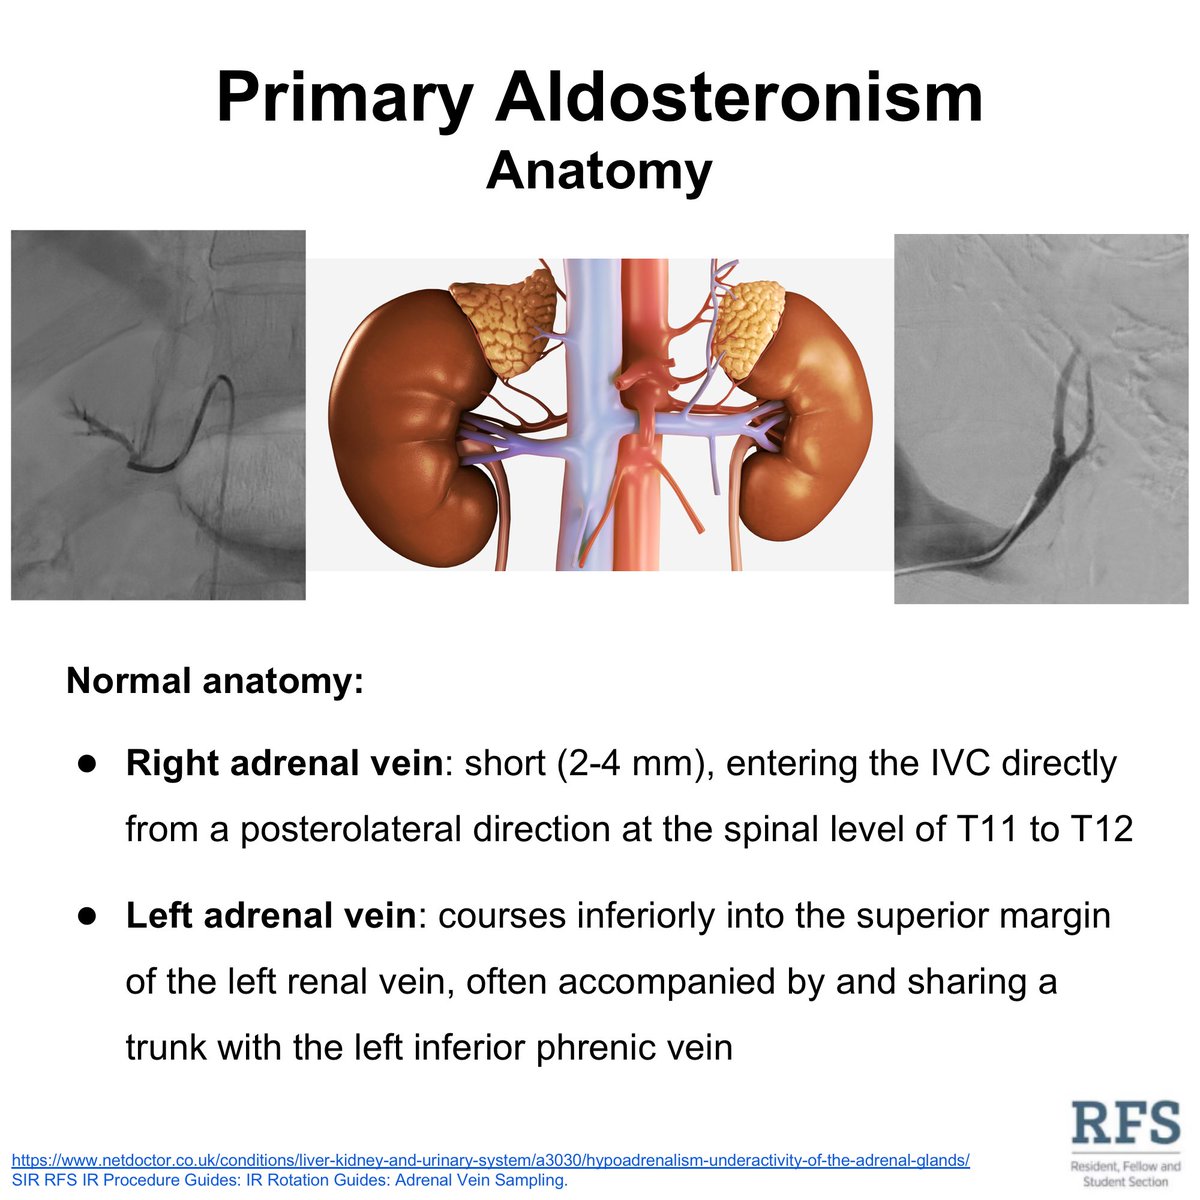 The right adrenal vein enters the IVC directly at the level of T11-T12. Meanwhile, the left adrenal vein shares a trunk with the left inferior phrenic vein branching off of the left renal vein.